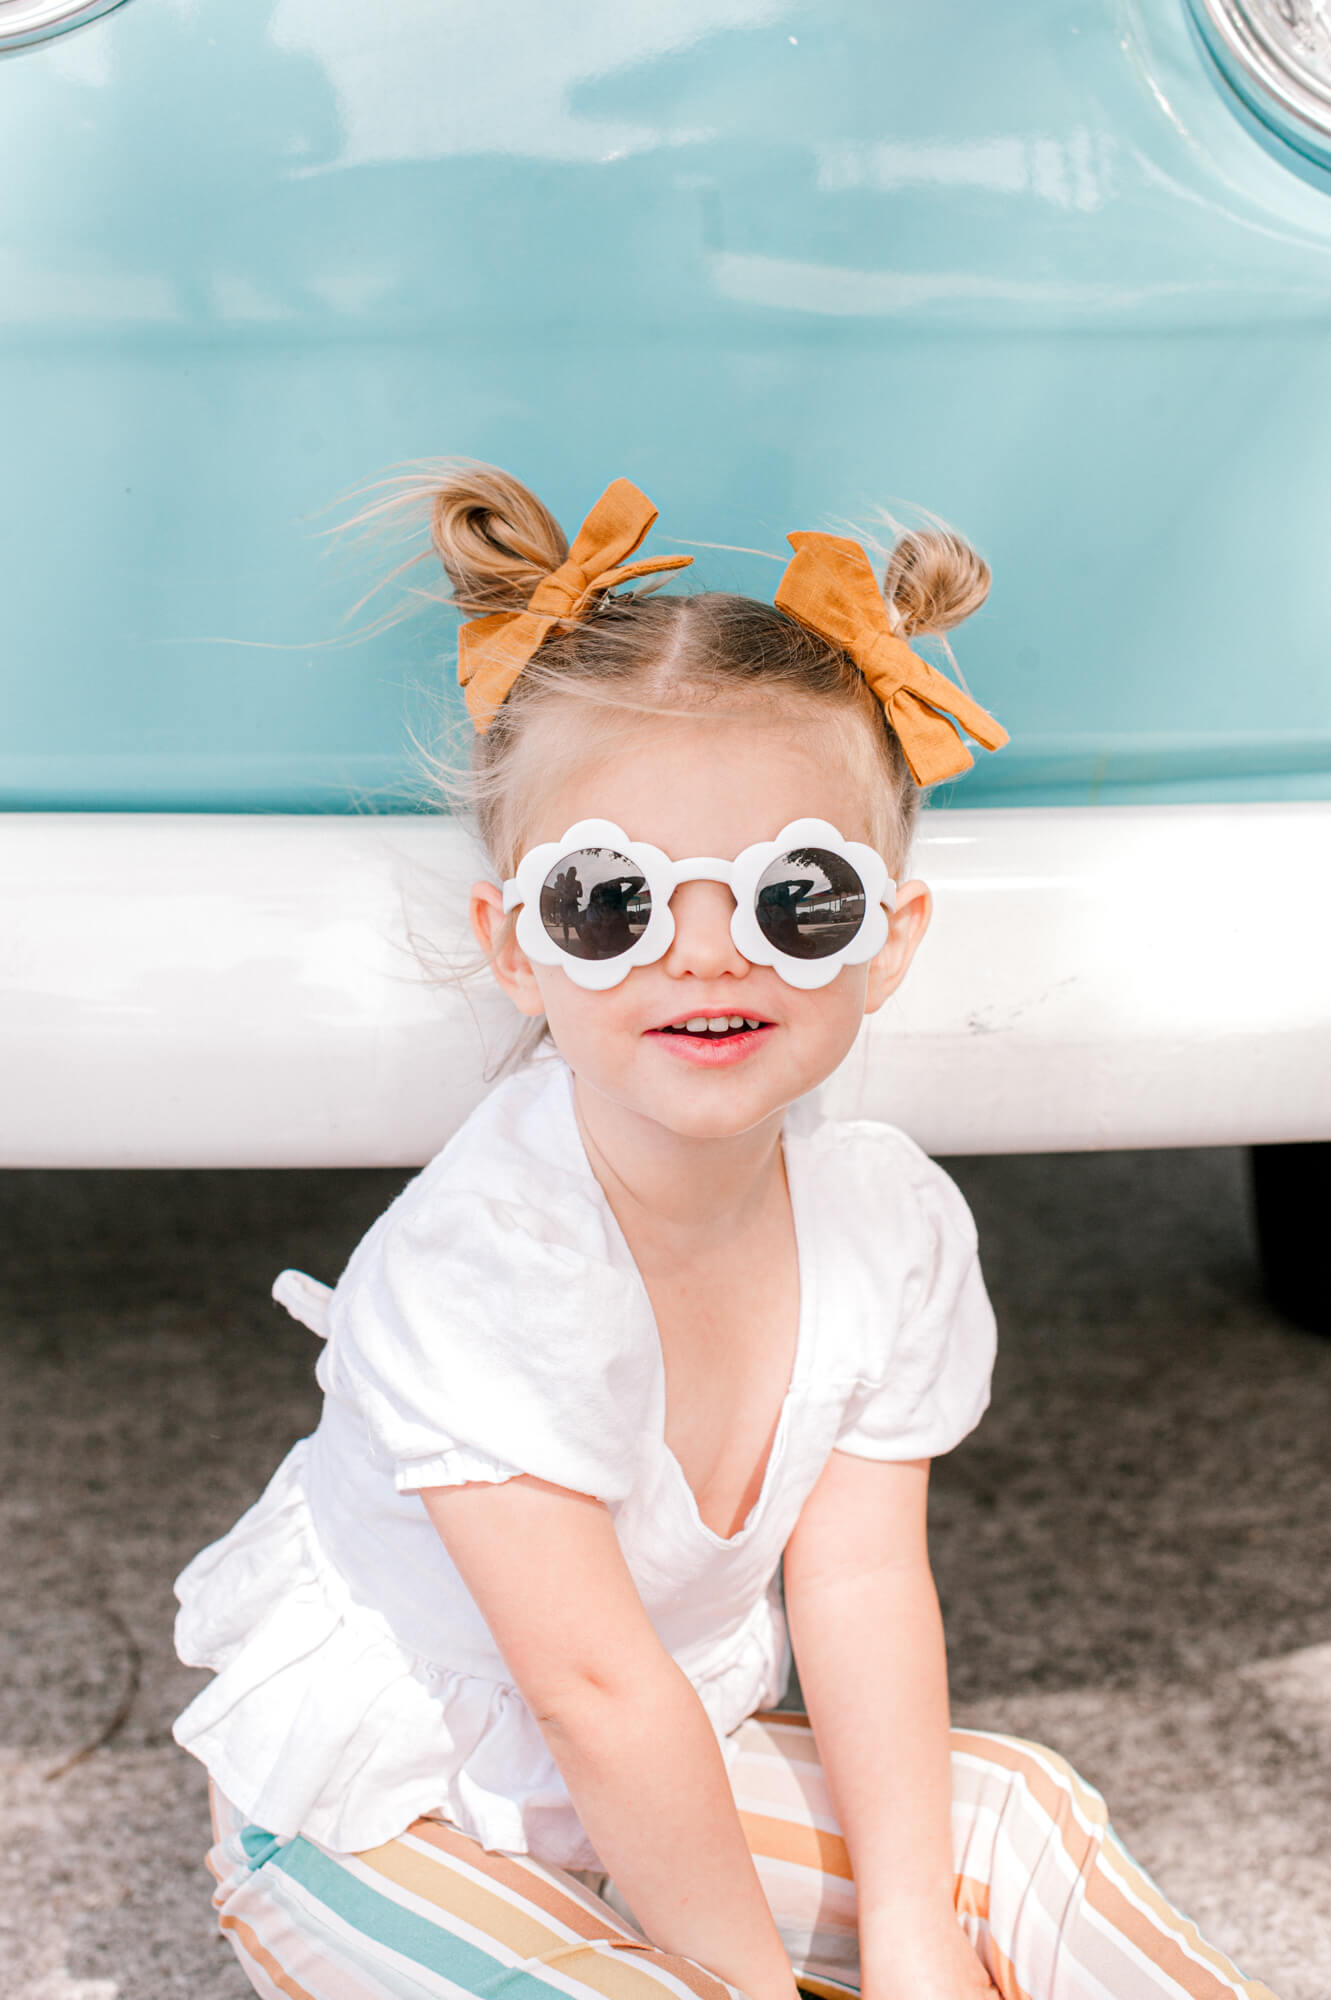 Adorable little girl in flower sunnies with space buns and the cutest outfit sitting in front of a blue VW bus